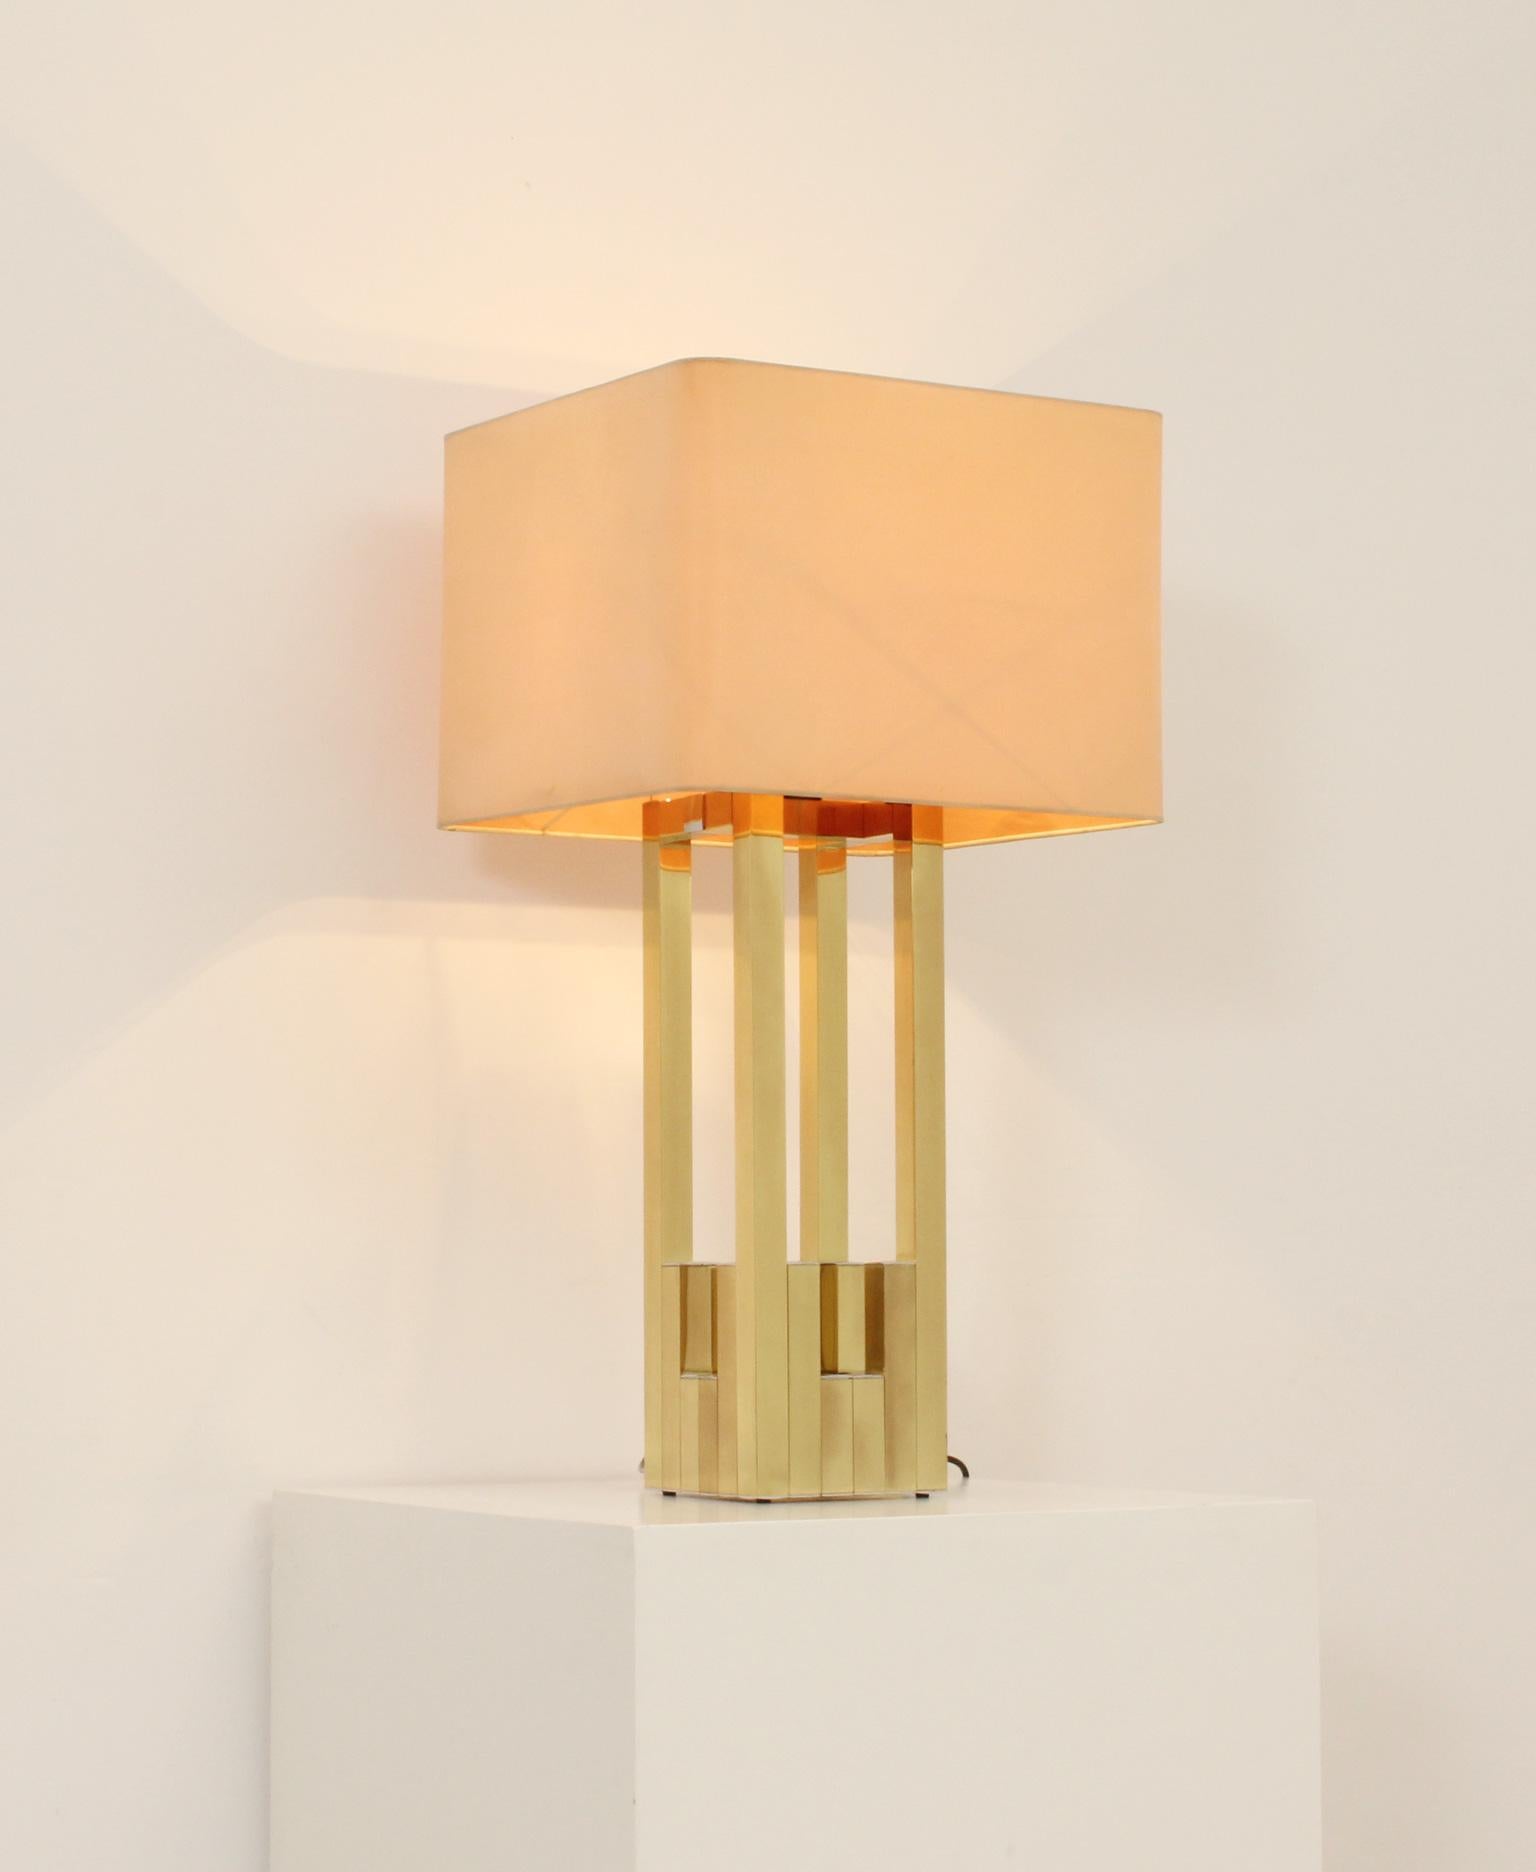 Large Lumica Brass Table Lamp, Spain, 1970s For Sale 6